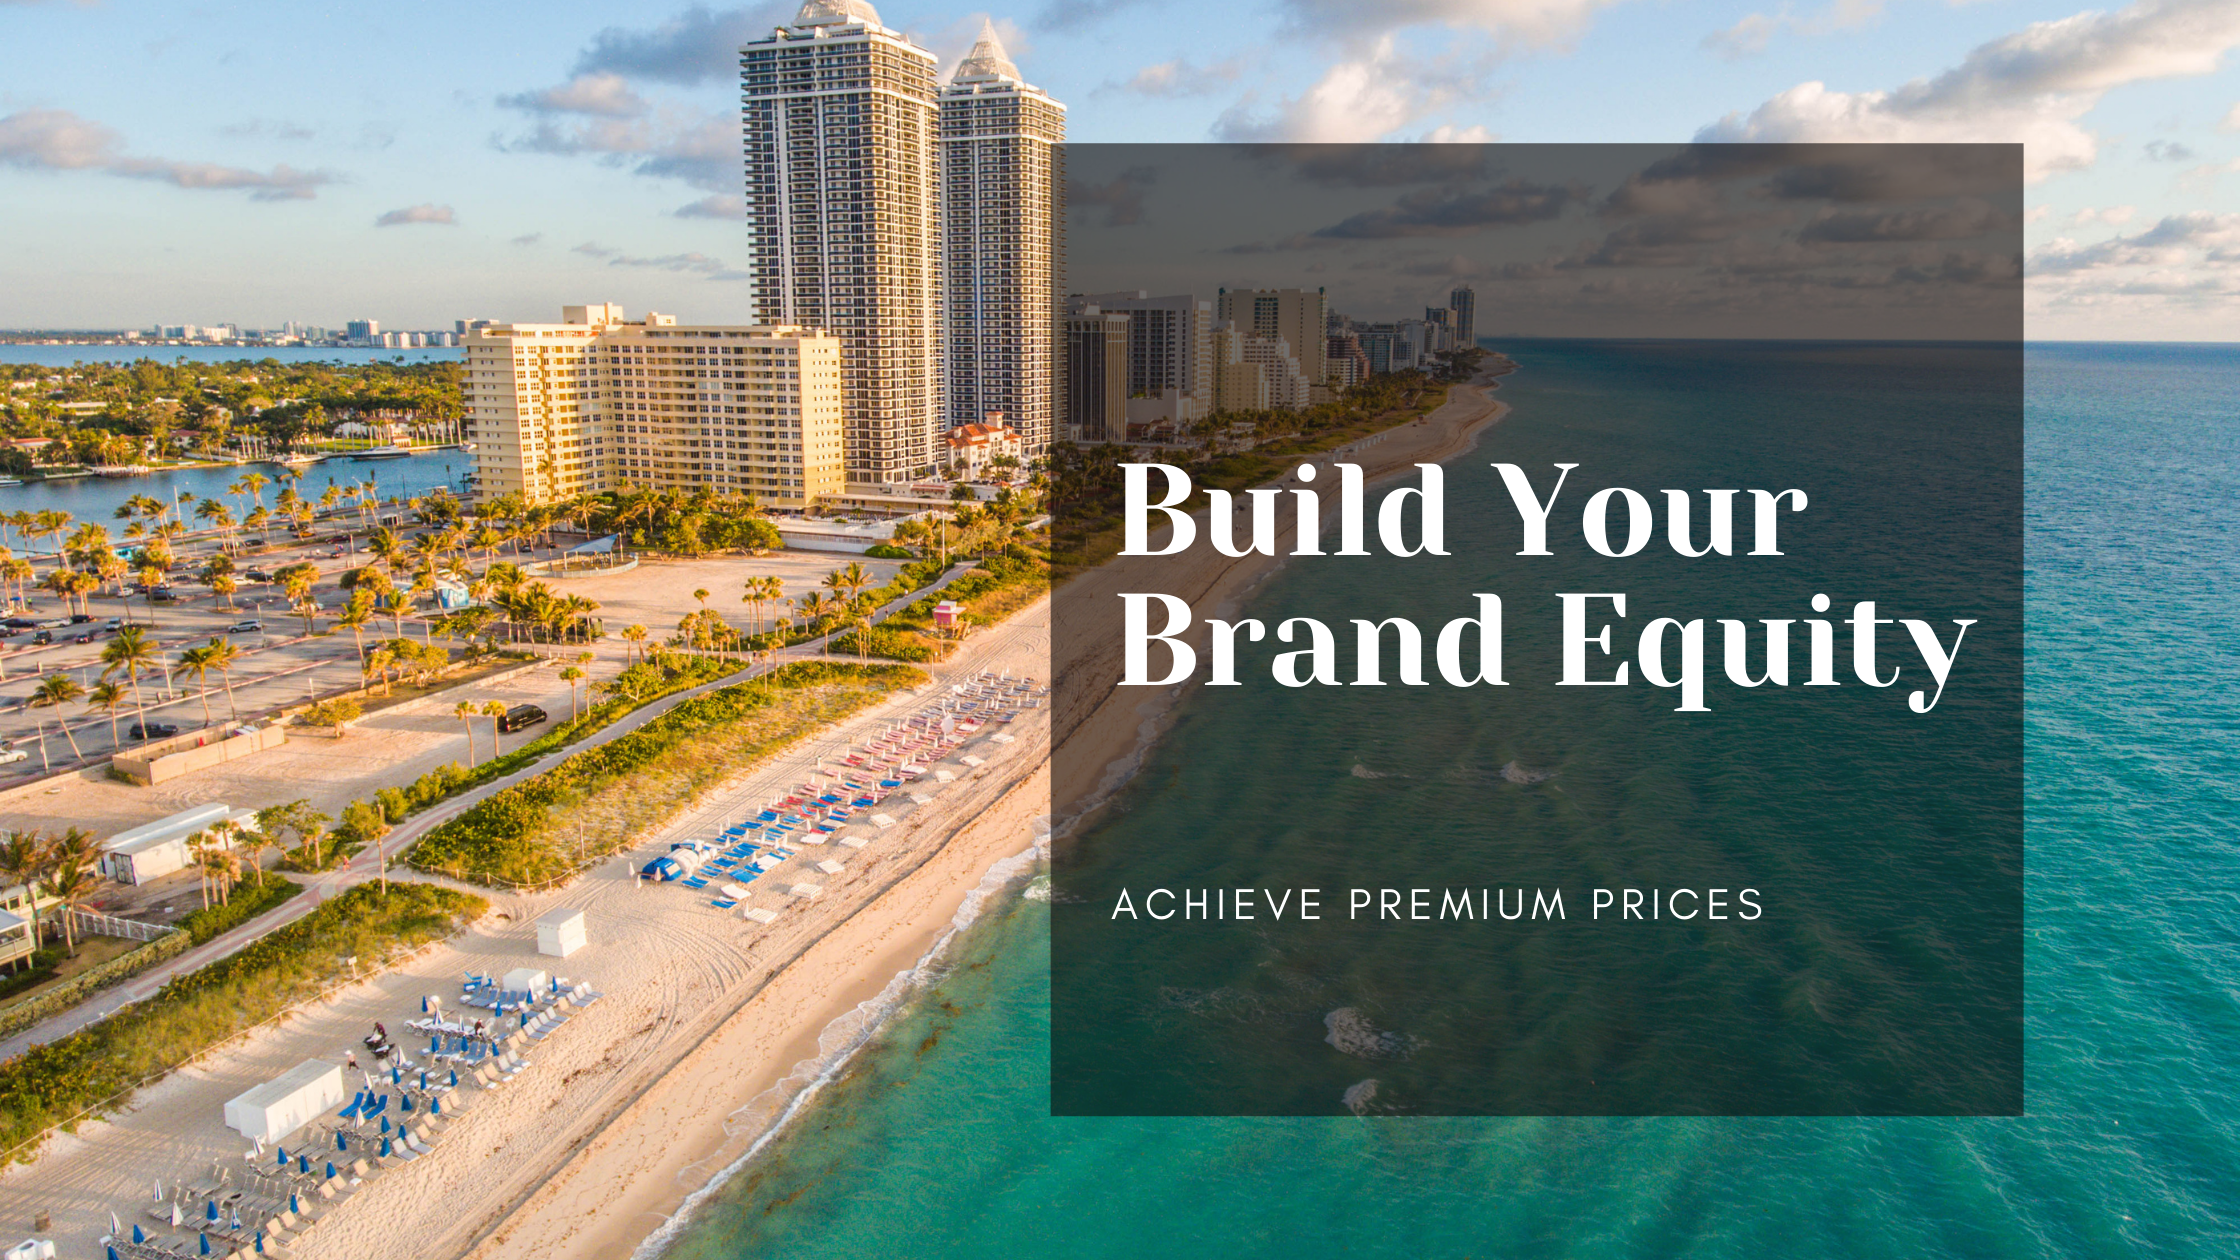 Build Your Brand Equity with Niche Quest Media